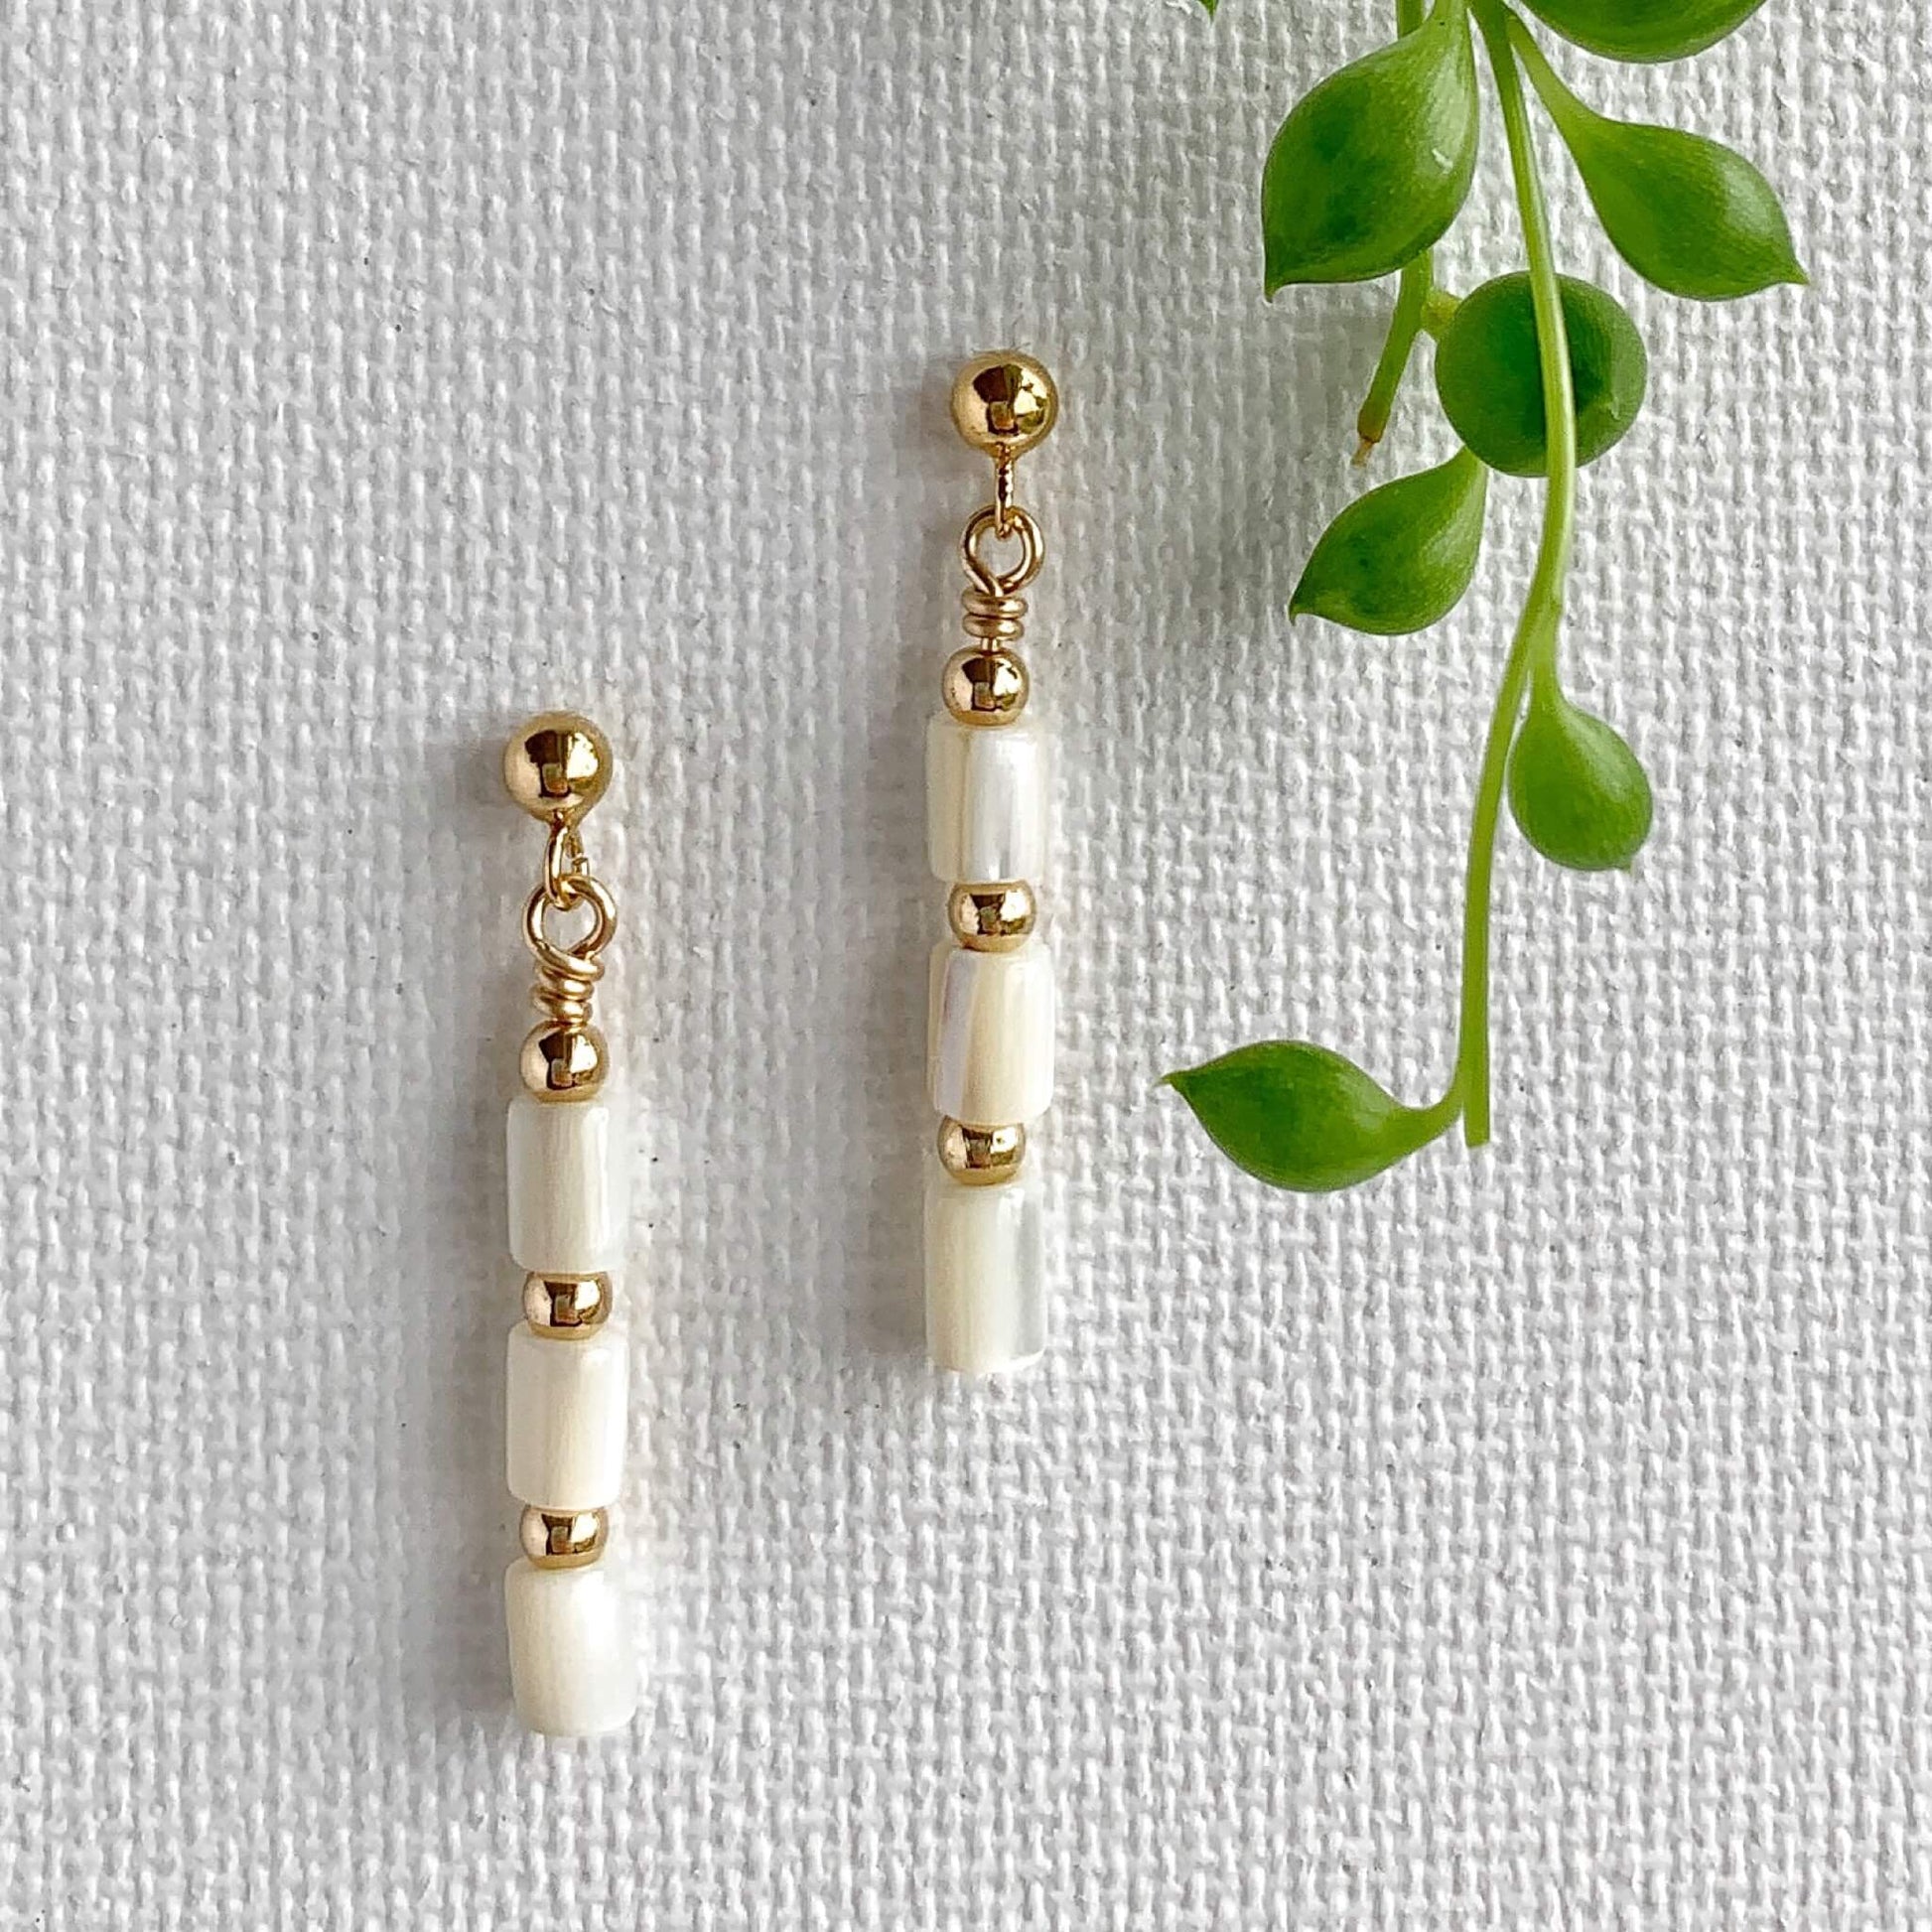 dainty gold stud dangle earrings with mother of pearl cylinder beads against a white background with a succulent plant